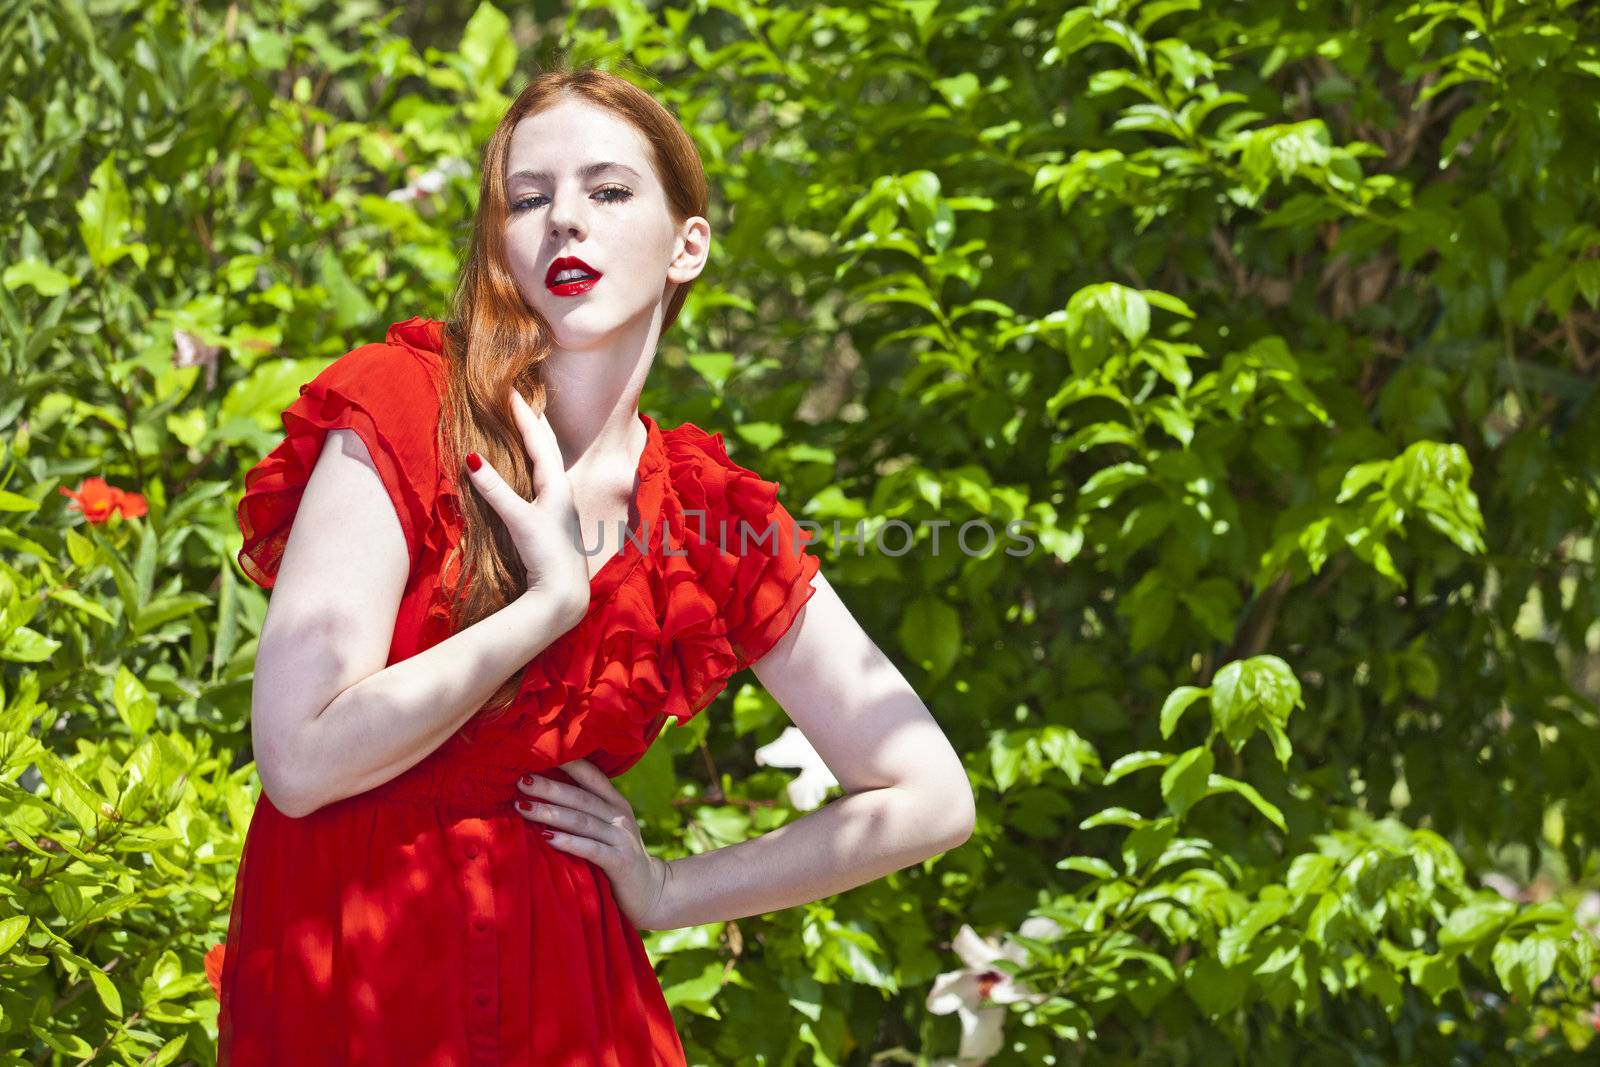 Beautiful model with white skin wearing a red dress with green foliage in background